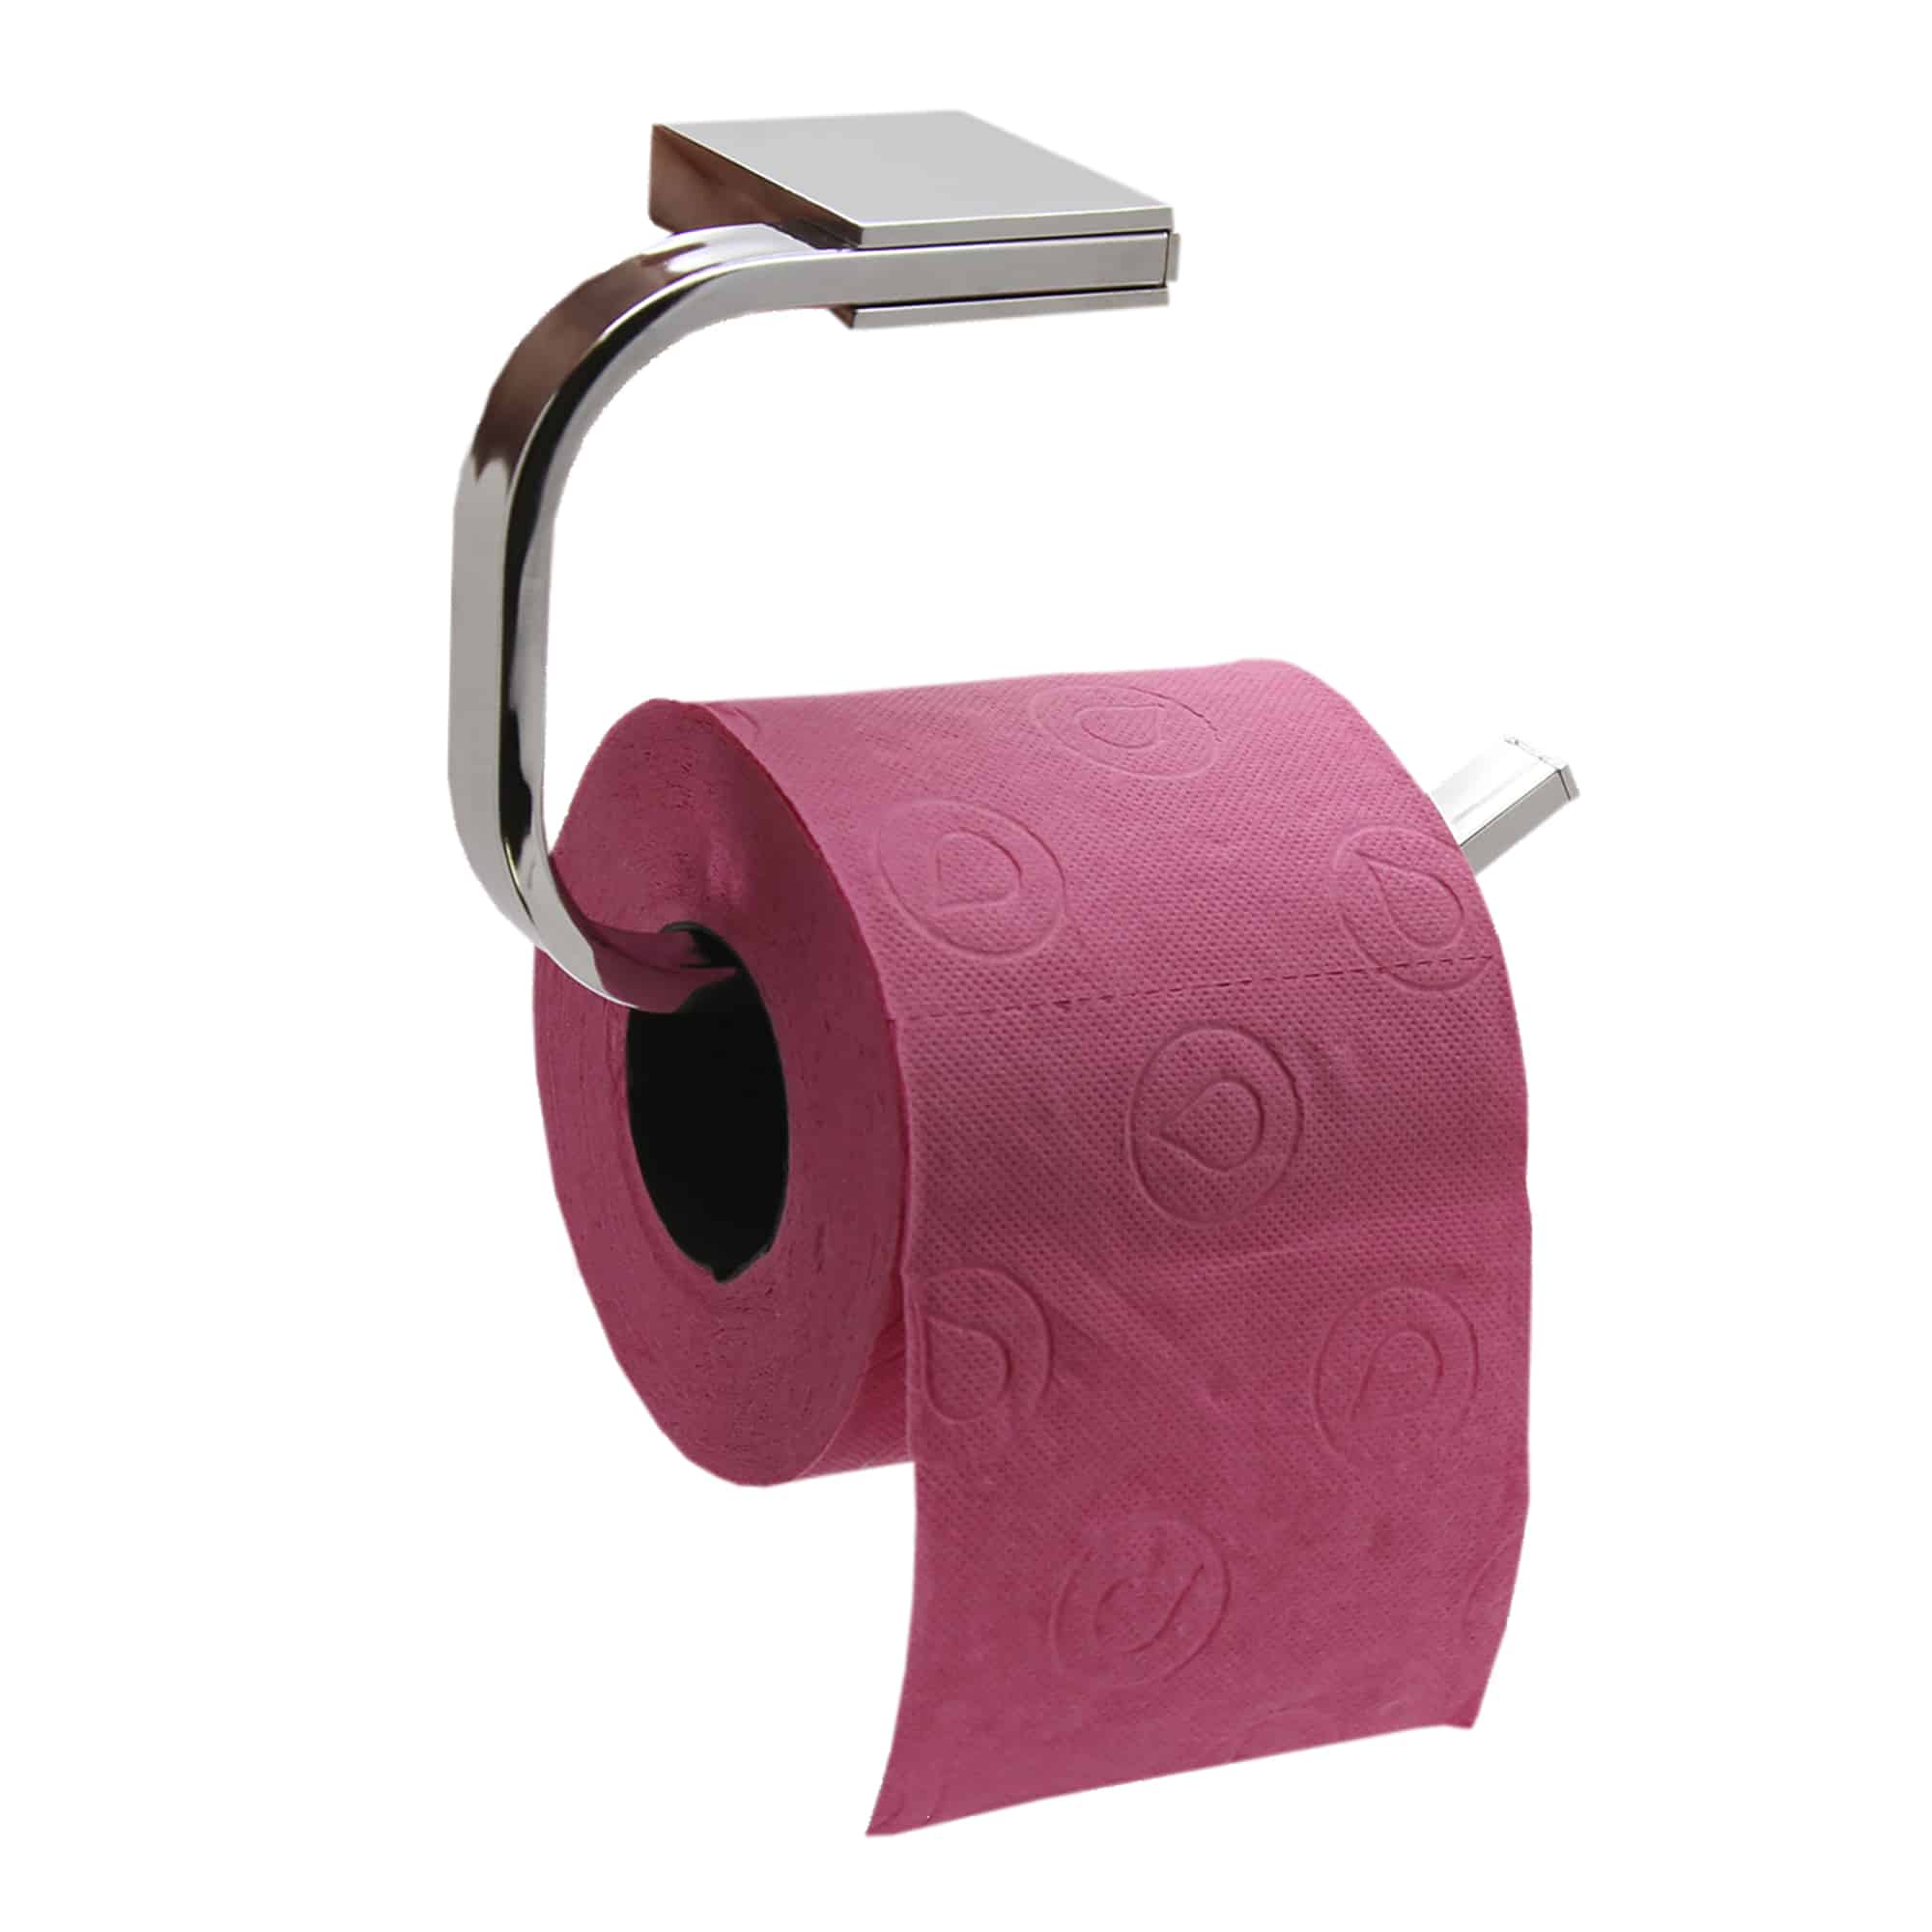 Evideco Wall Mounted Stainless Steel (Silver) Toilet Paper Holder